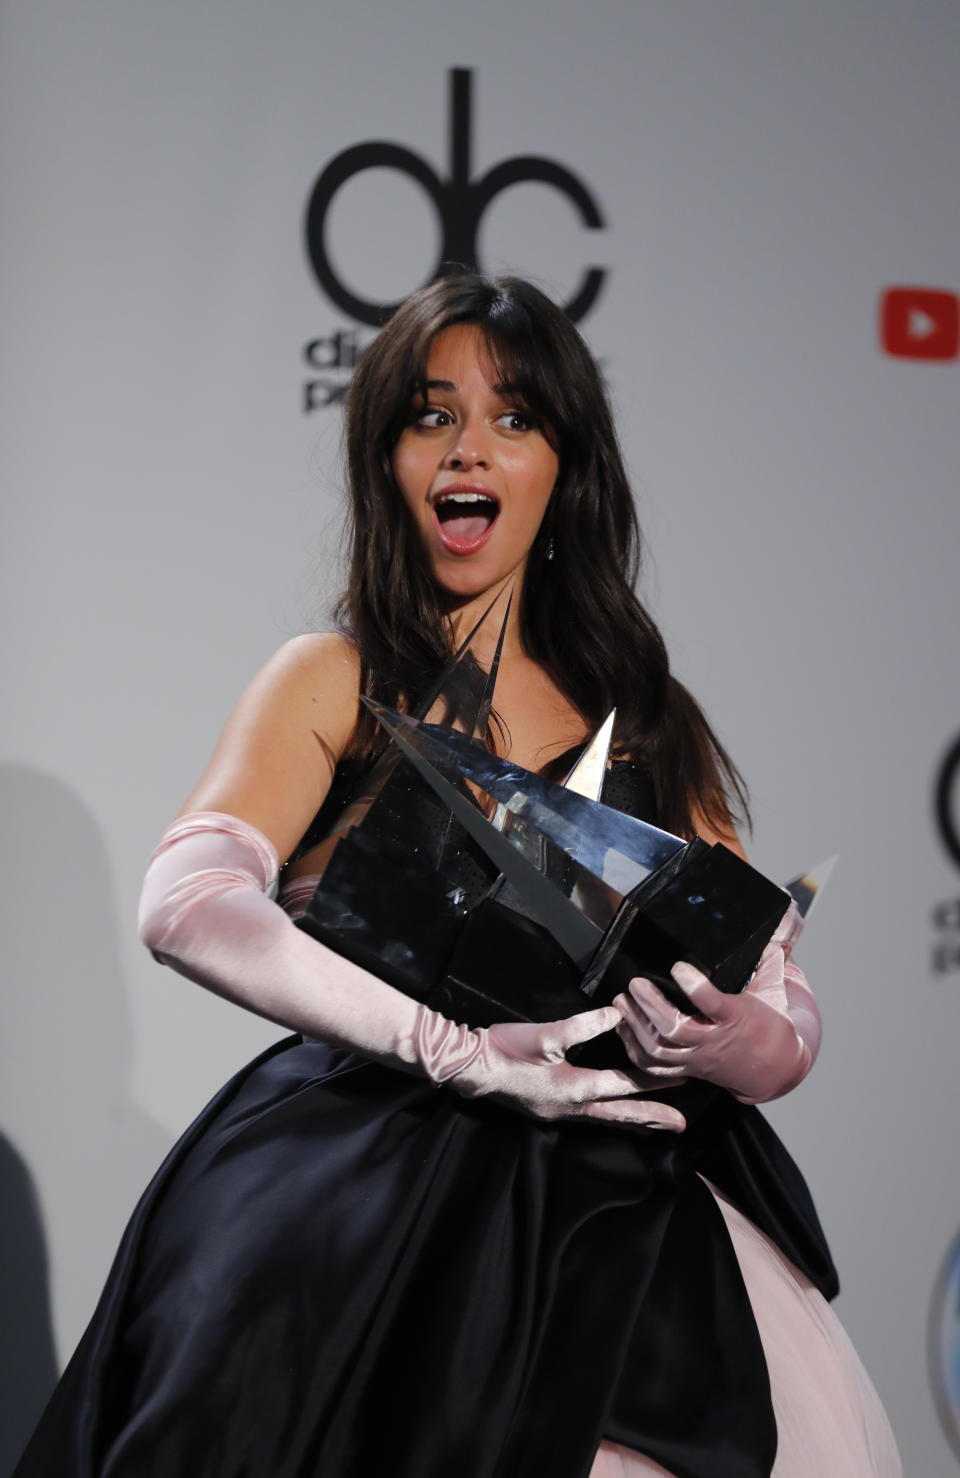 2018 American Music Awards - Photo Room - Los Angeles, California, U.S., 09/10/2018 - Camila Cabello poses backstage with her awards. REUTERS/Mike Blake